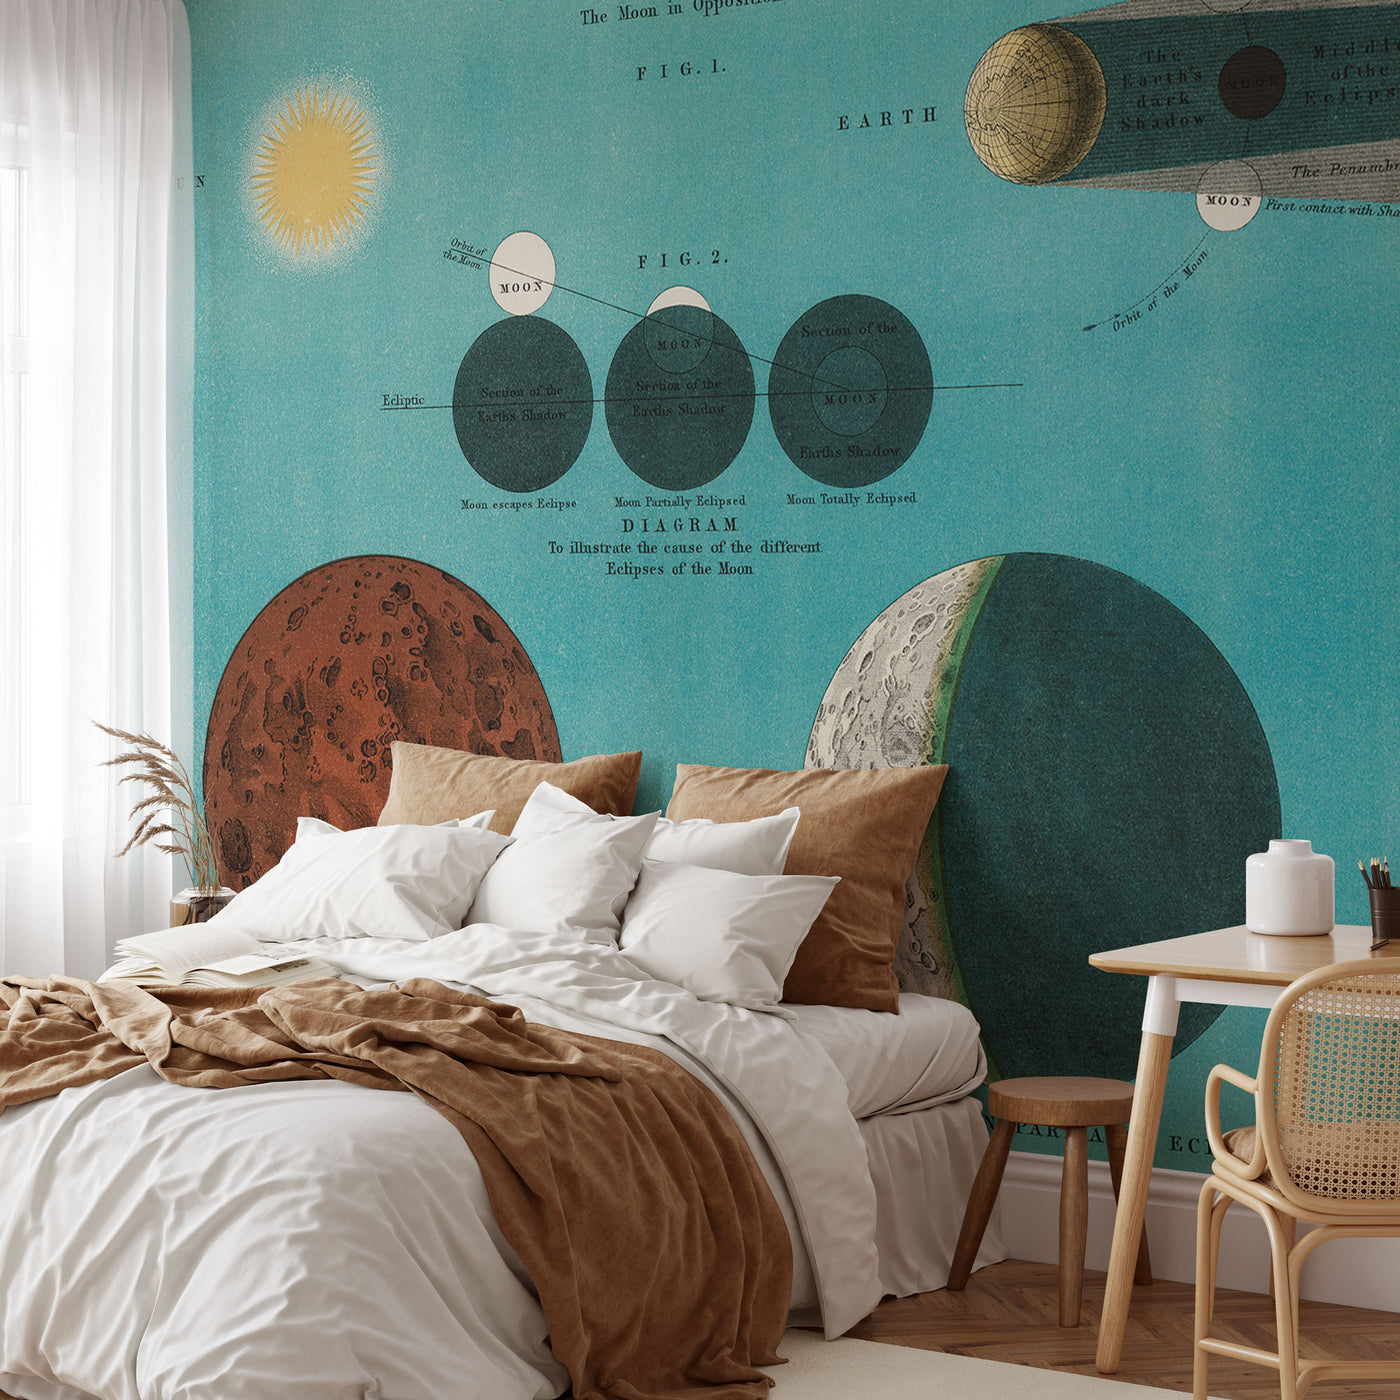 Eclipse of the Moon Wall Mural